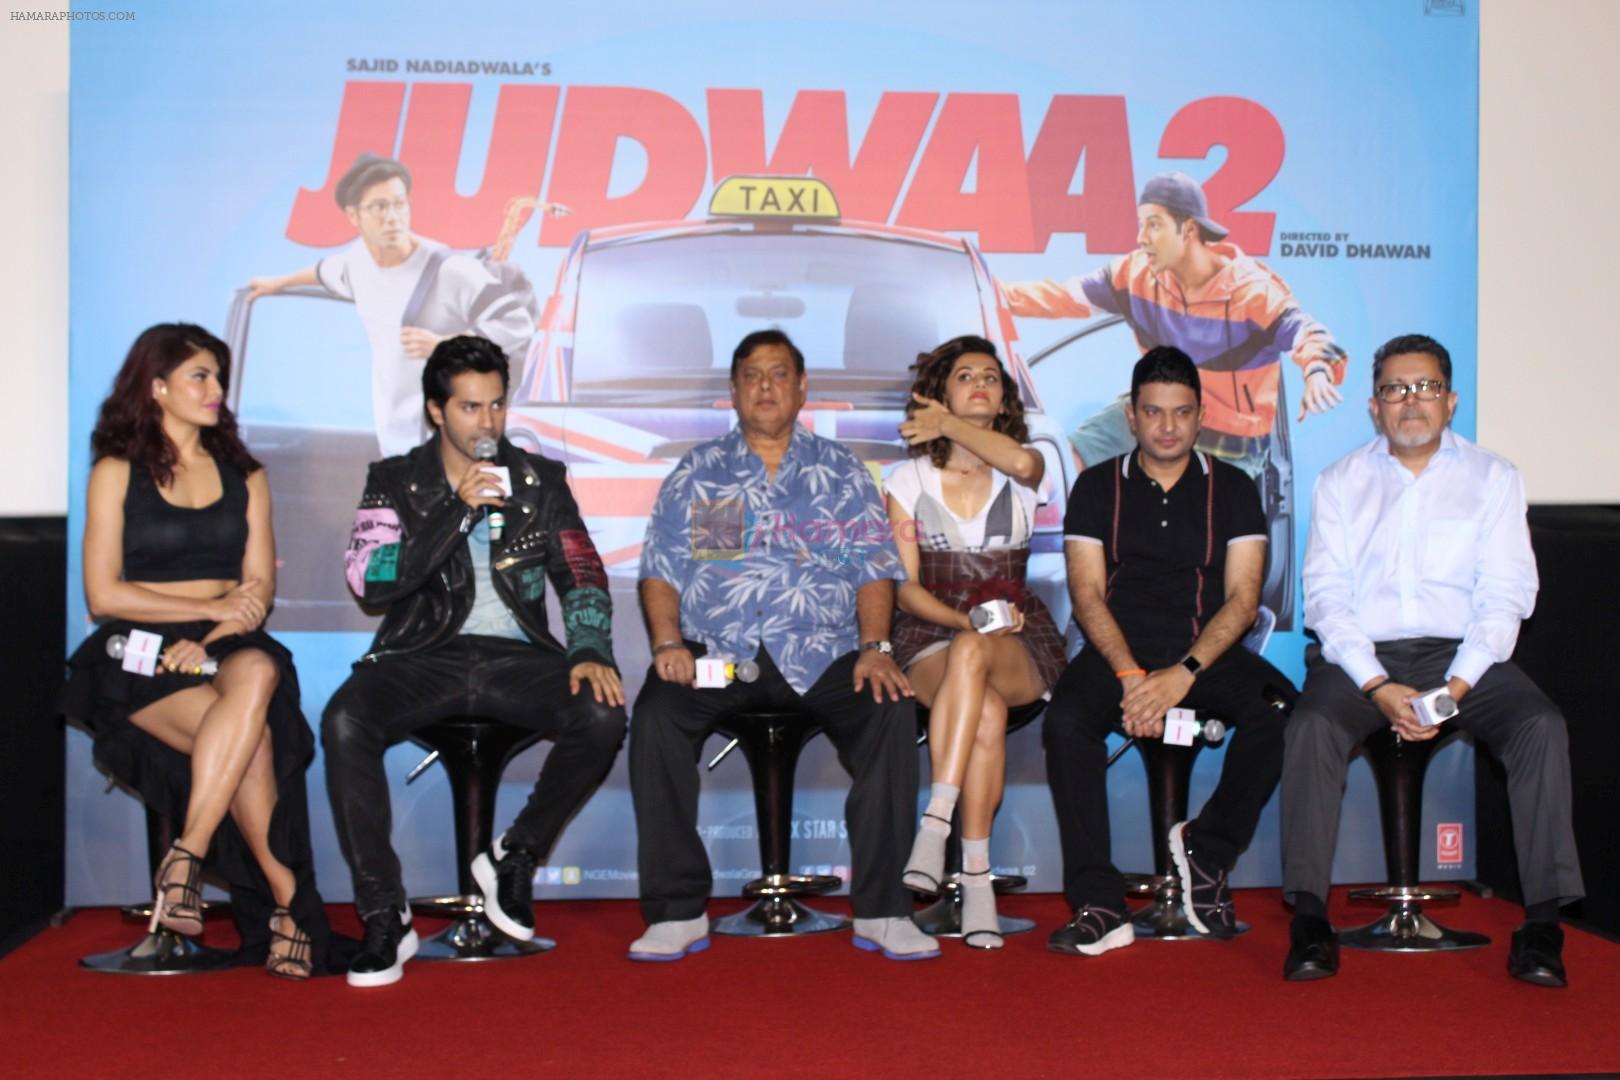 Varun Dhawan,Jacqueline Fernandez, Taapsee Pannu at the Trailer Launch Of Judwaa 2 on 21st Aug 2017